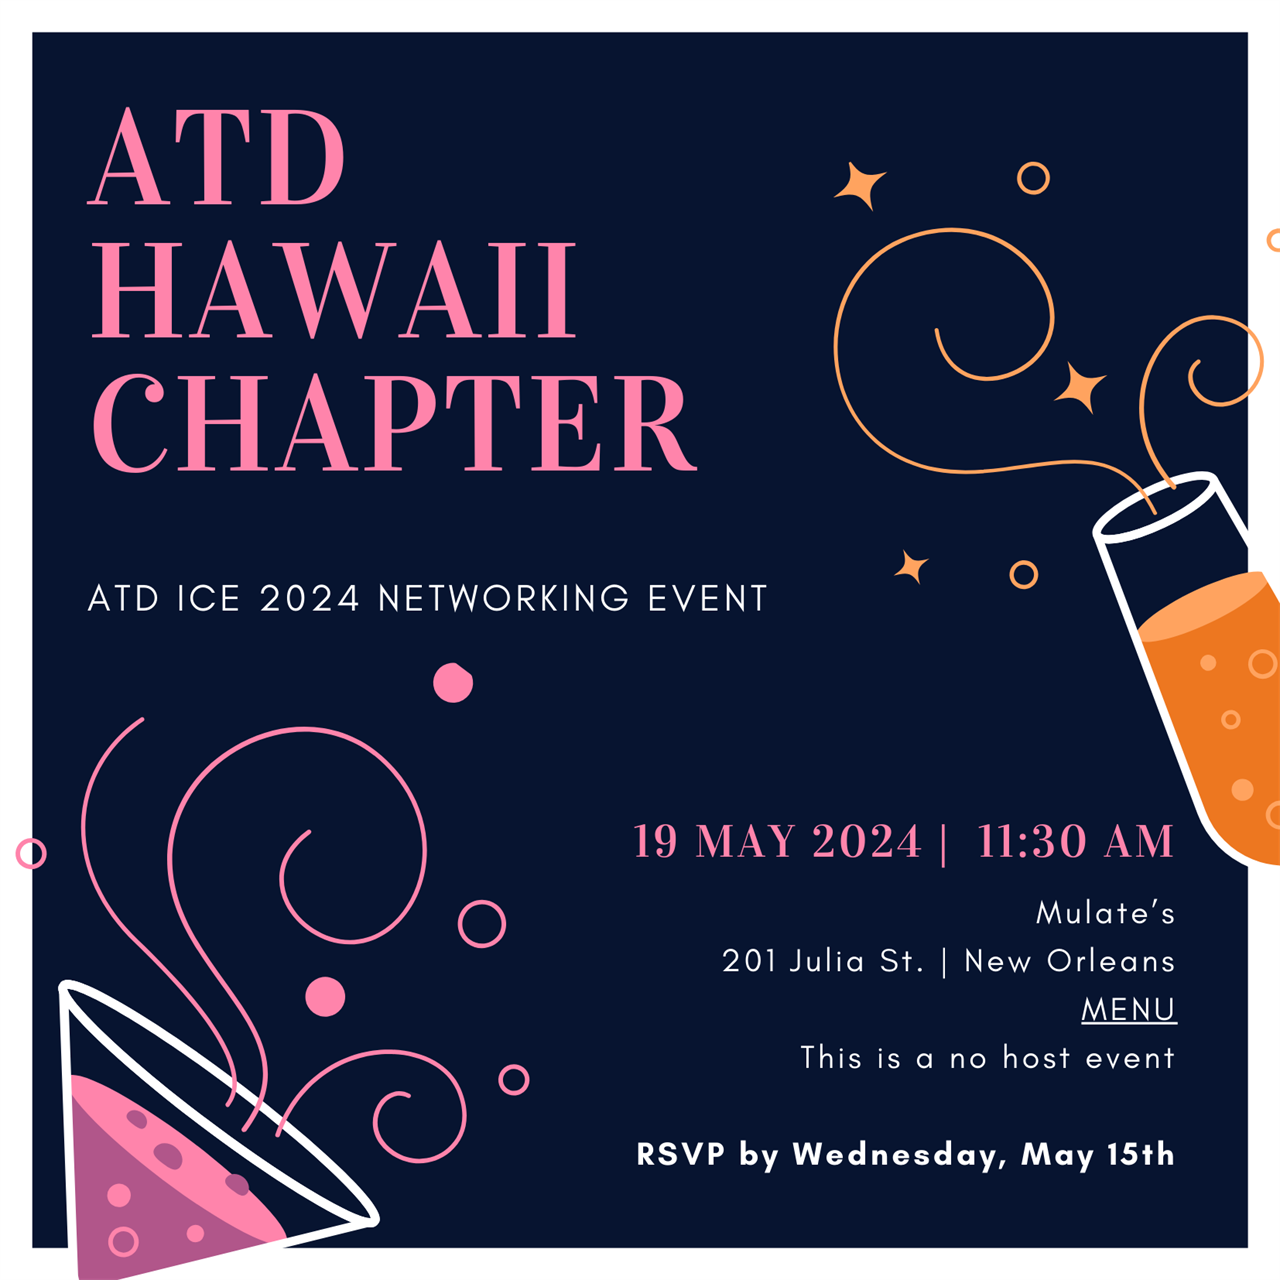 ATD Hawaii Chapter. ATD ICE 2024 Networking Event. May 19, 2024. 11:30am. Mulate's. 201 Julia St. New Orleans. Menu. This is a no host event. RSVP by Wednesday, May 15th. 